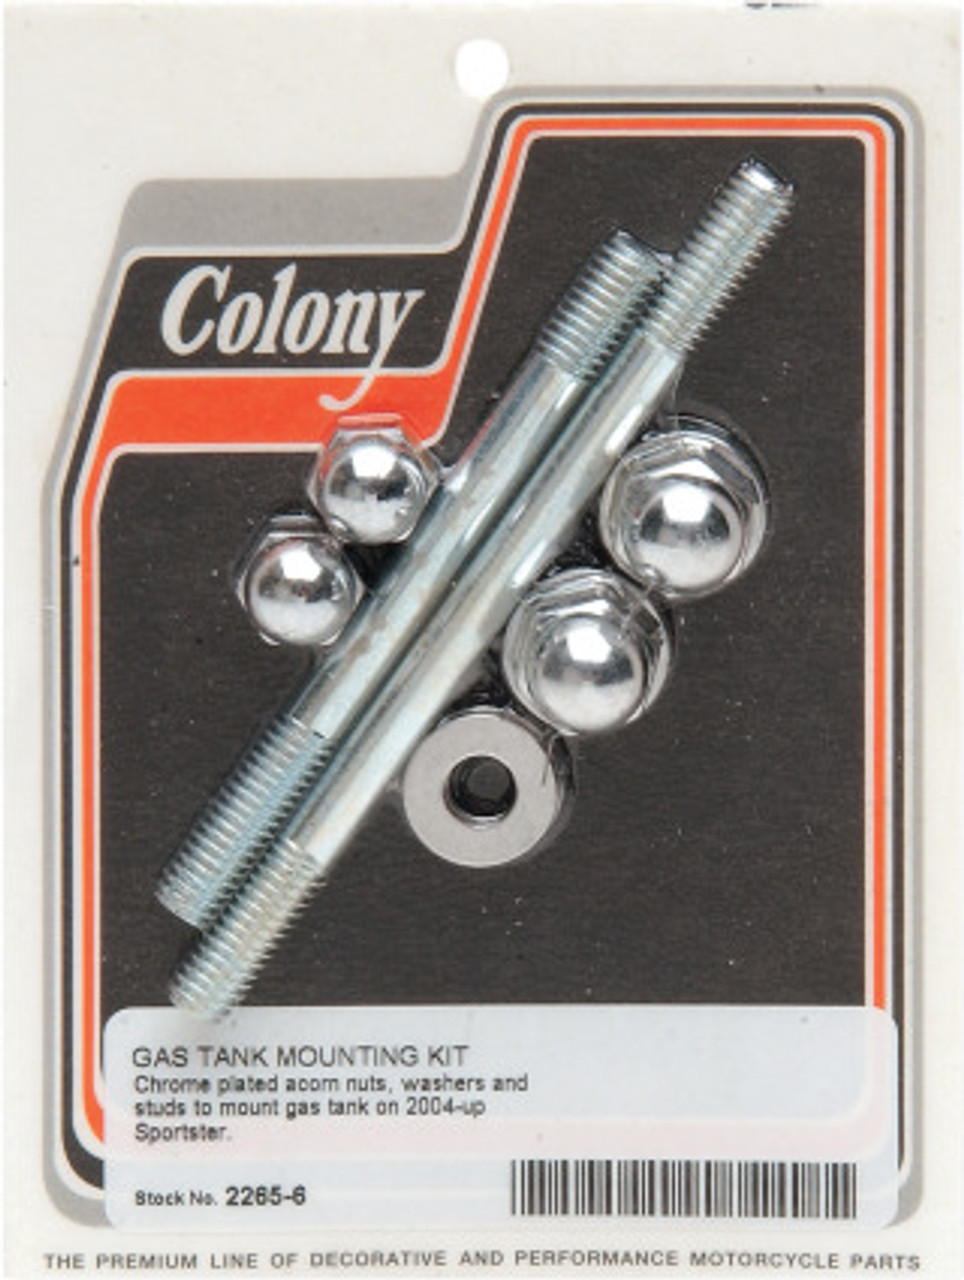 Colony - Gas Tank Mounting Hardware Kits - fits Harley Models